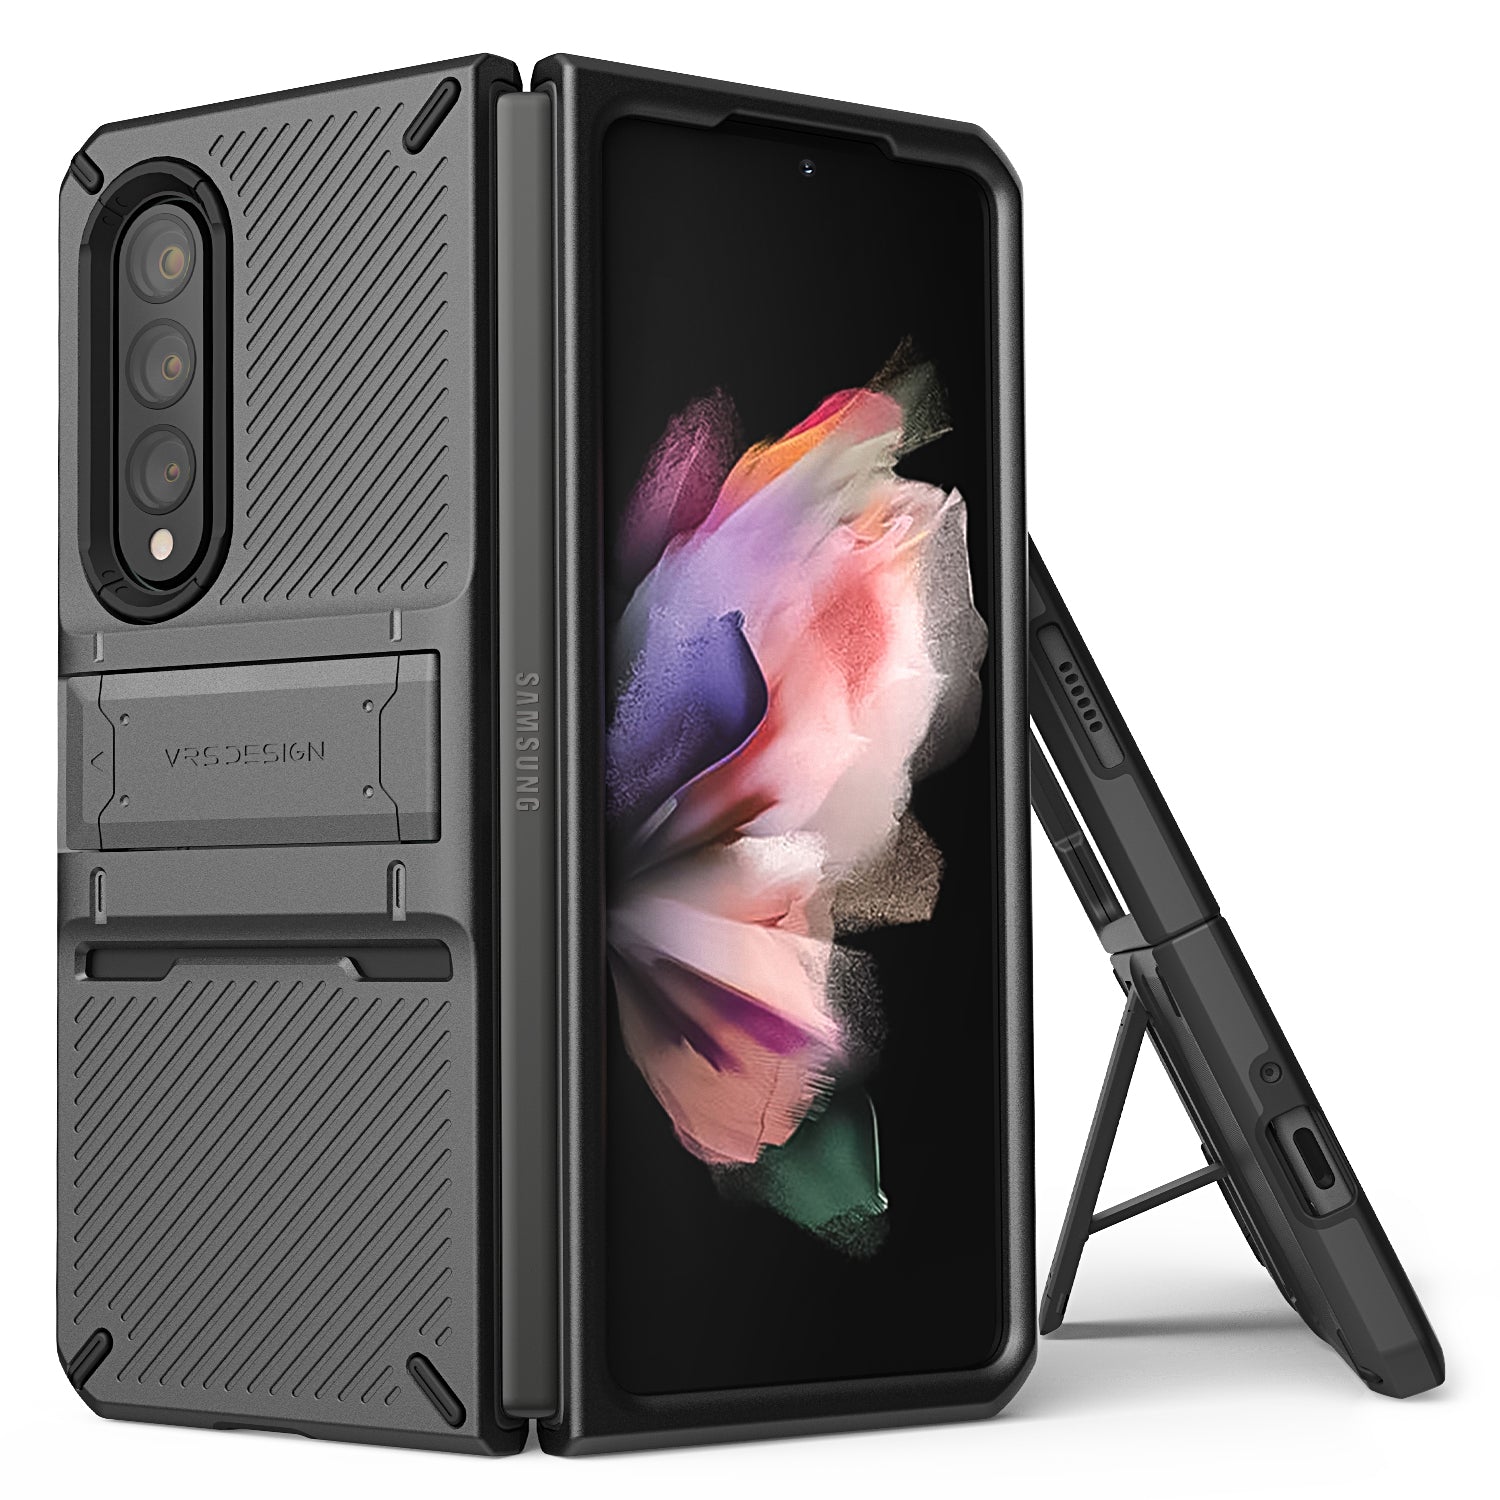 Samsung Galaxy Z Fold 3 wallet rugged case with multiple durable and convenient card slot with sleek minimalism by VRS